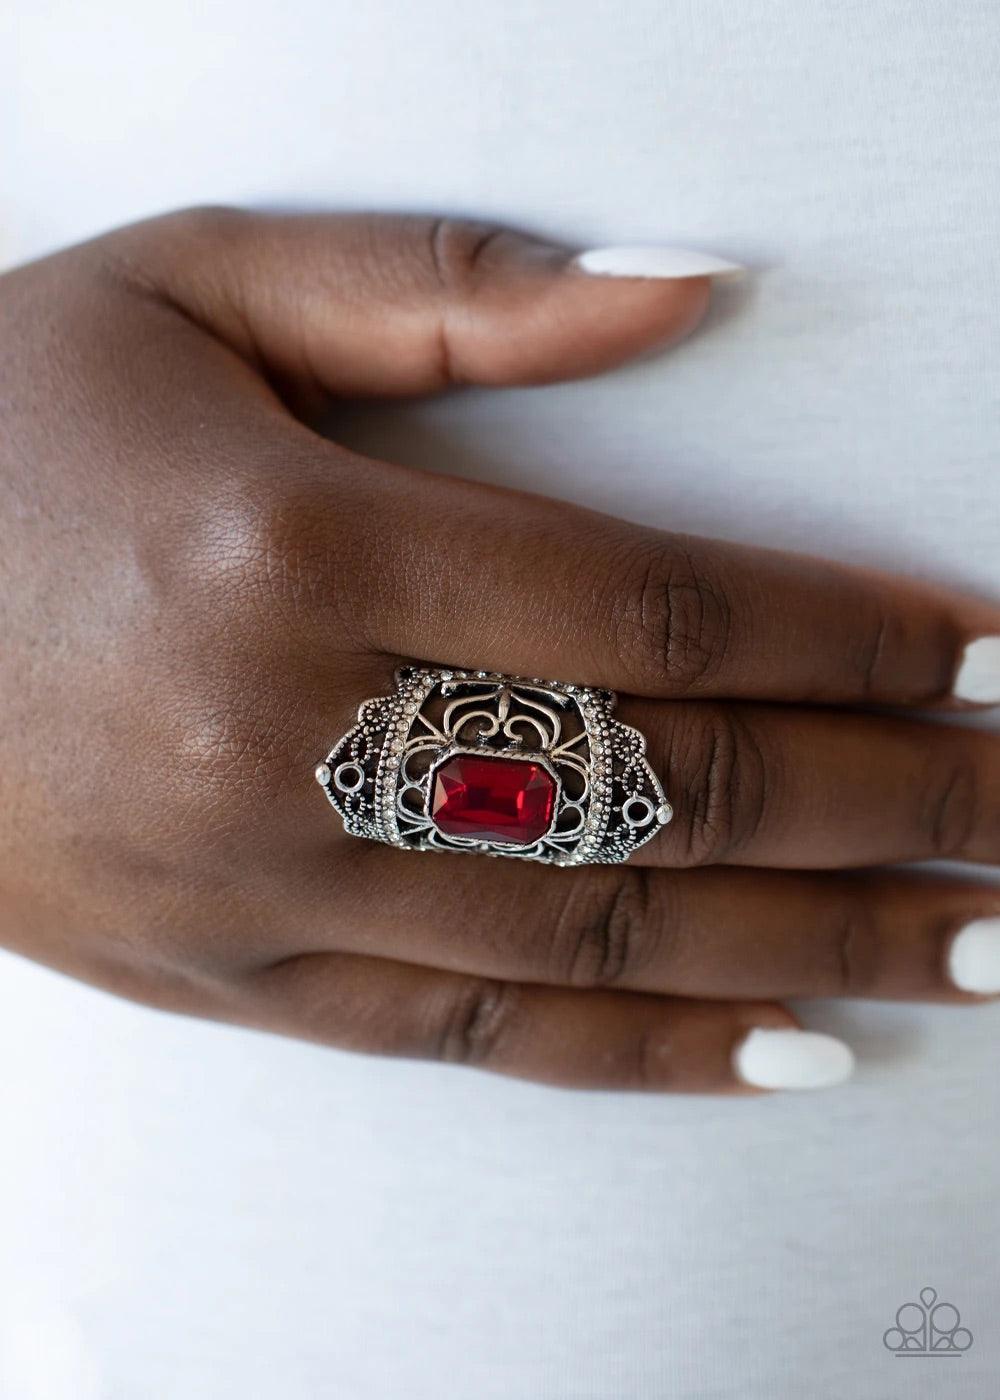 Paparazzi Accessories Undefinable Dazzle - Red Infused with two bands of glittery white rhinestones, smooth and studded silver filigree branches out into a regal backdrop across the finger. Featuring an emerald style cut, a stunning red rhinestone embelli